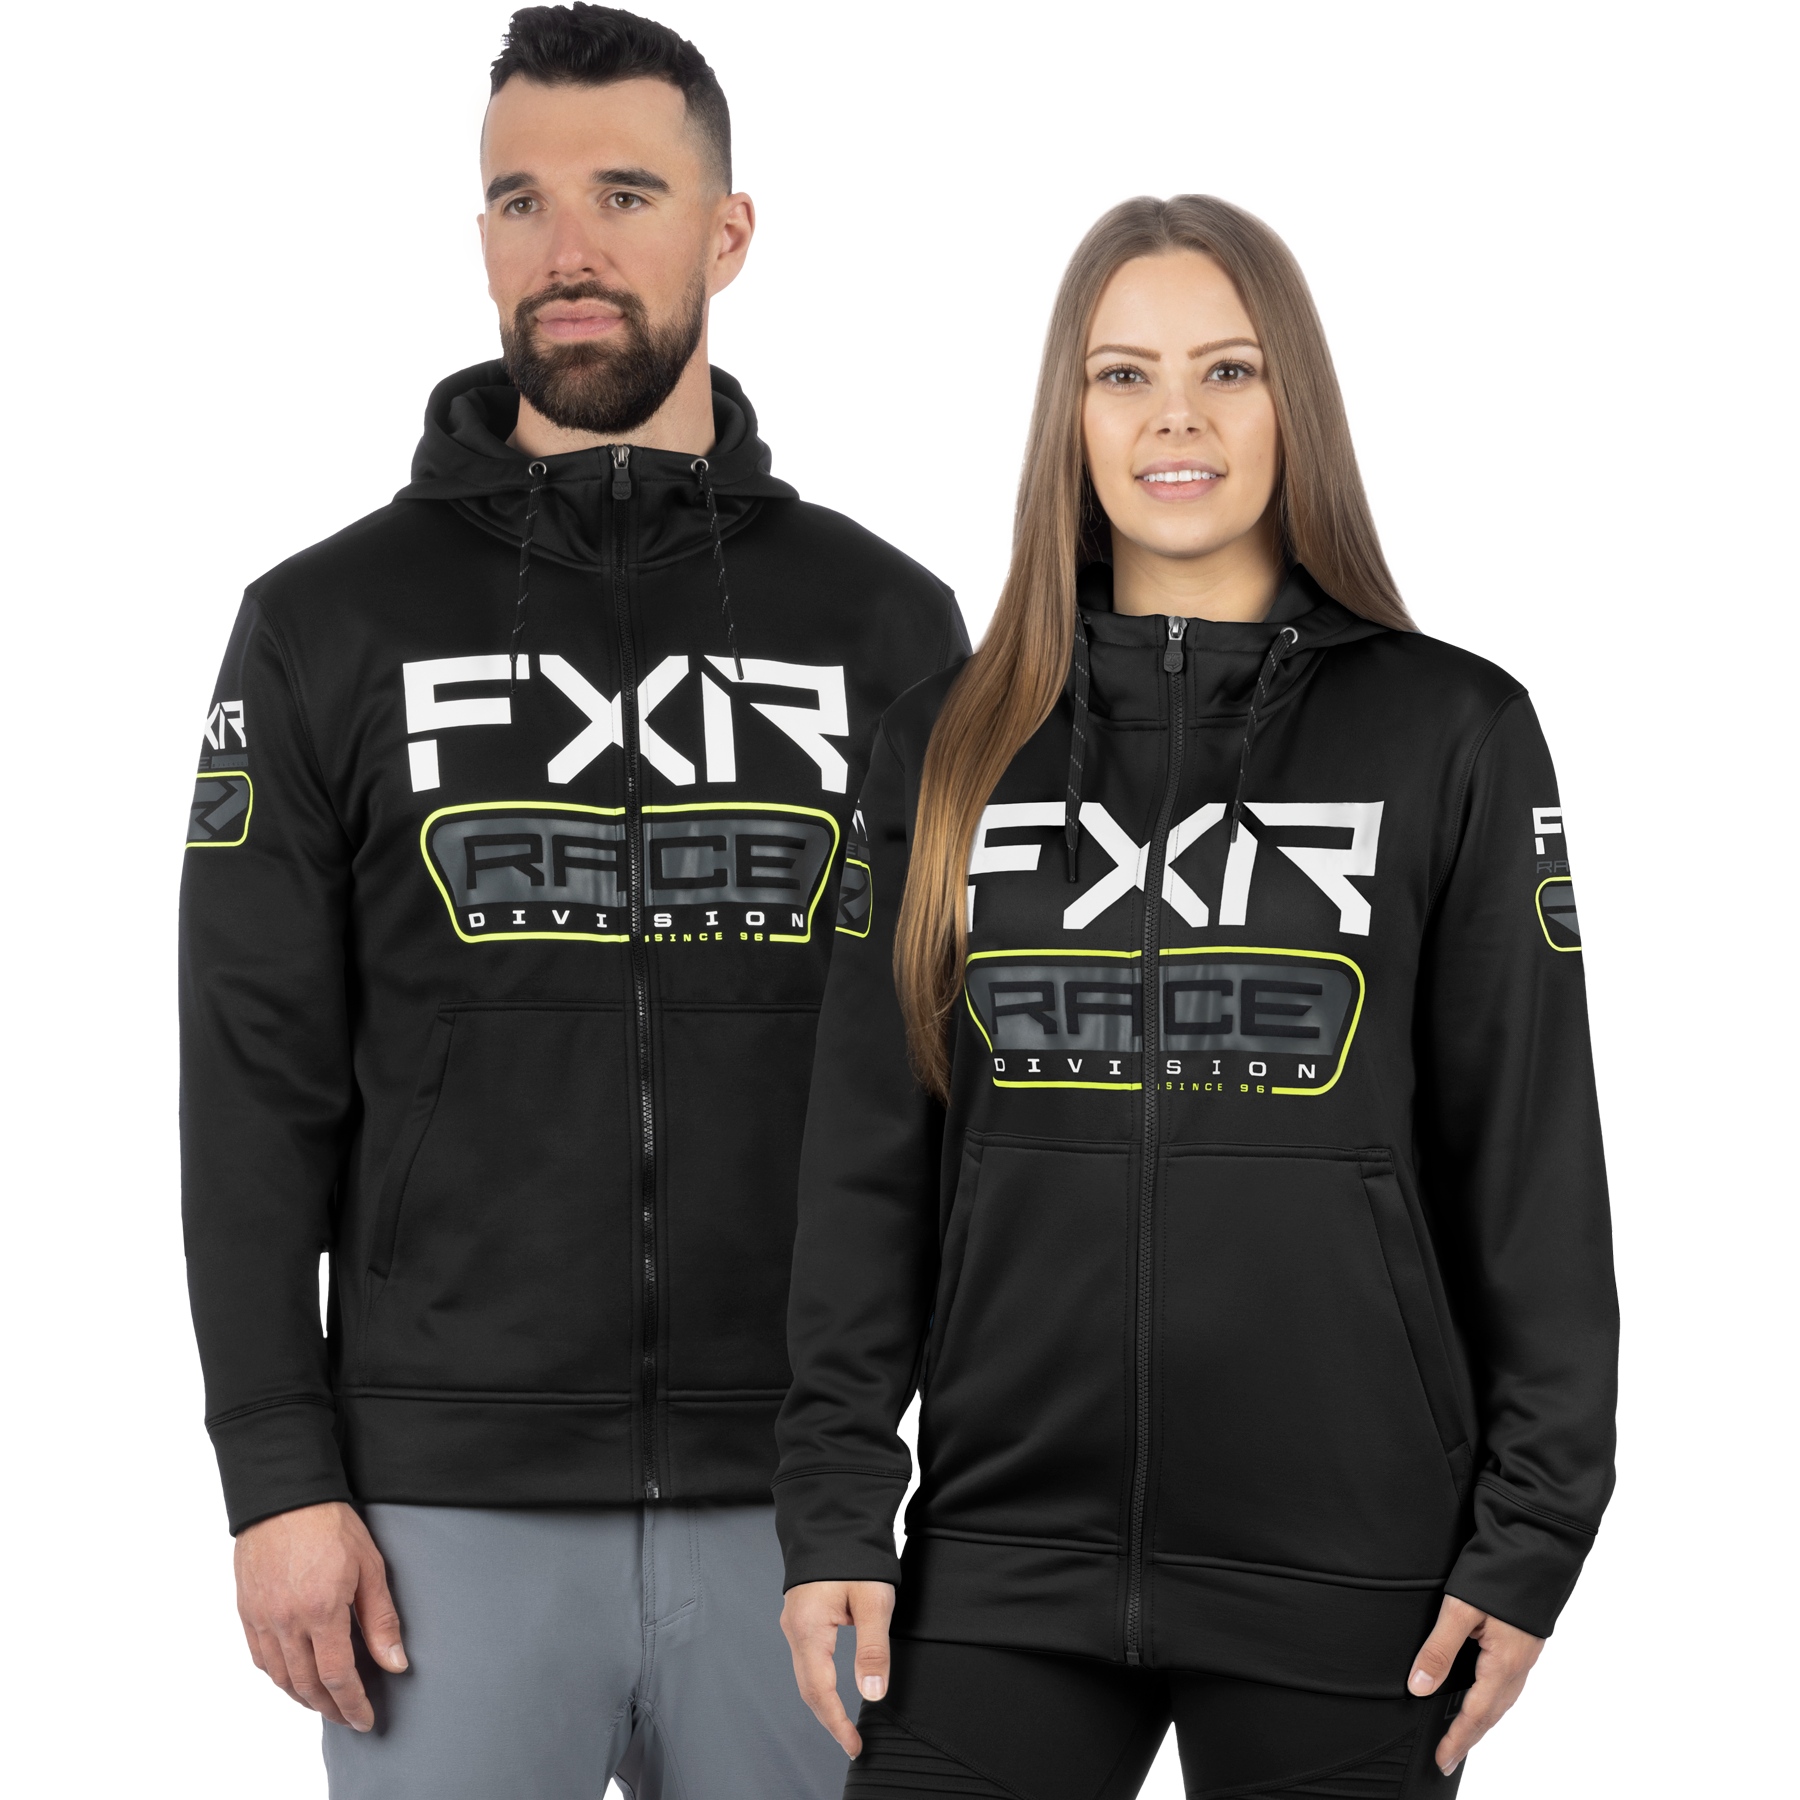 fxr racing hoodies for mens adult unisex race division tech